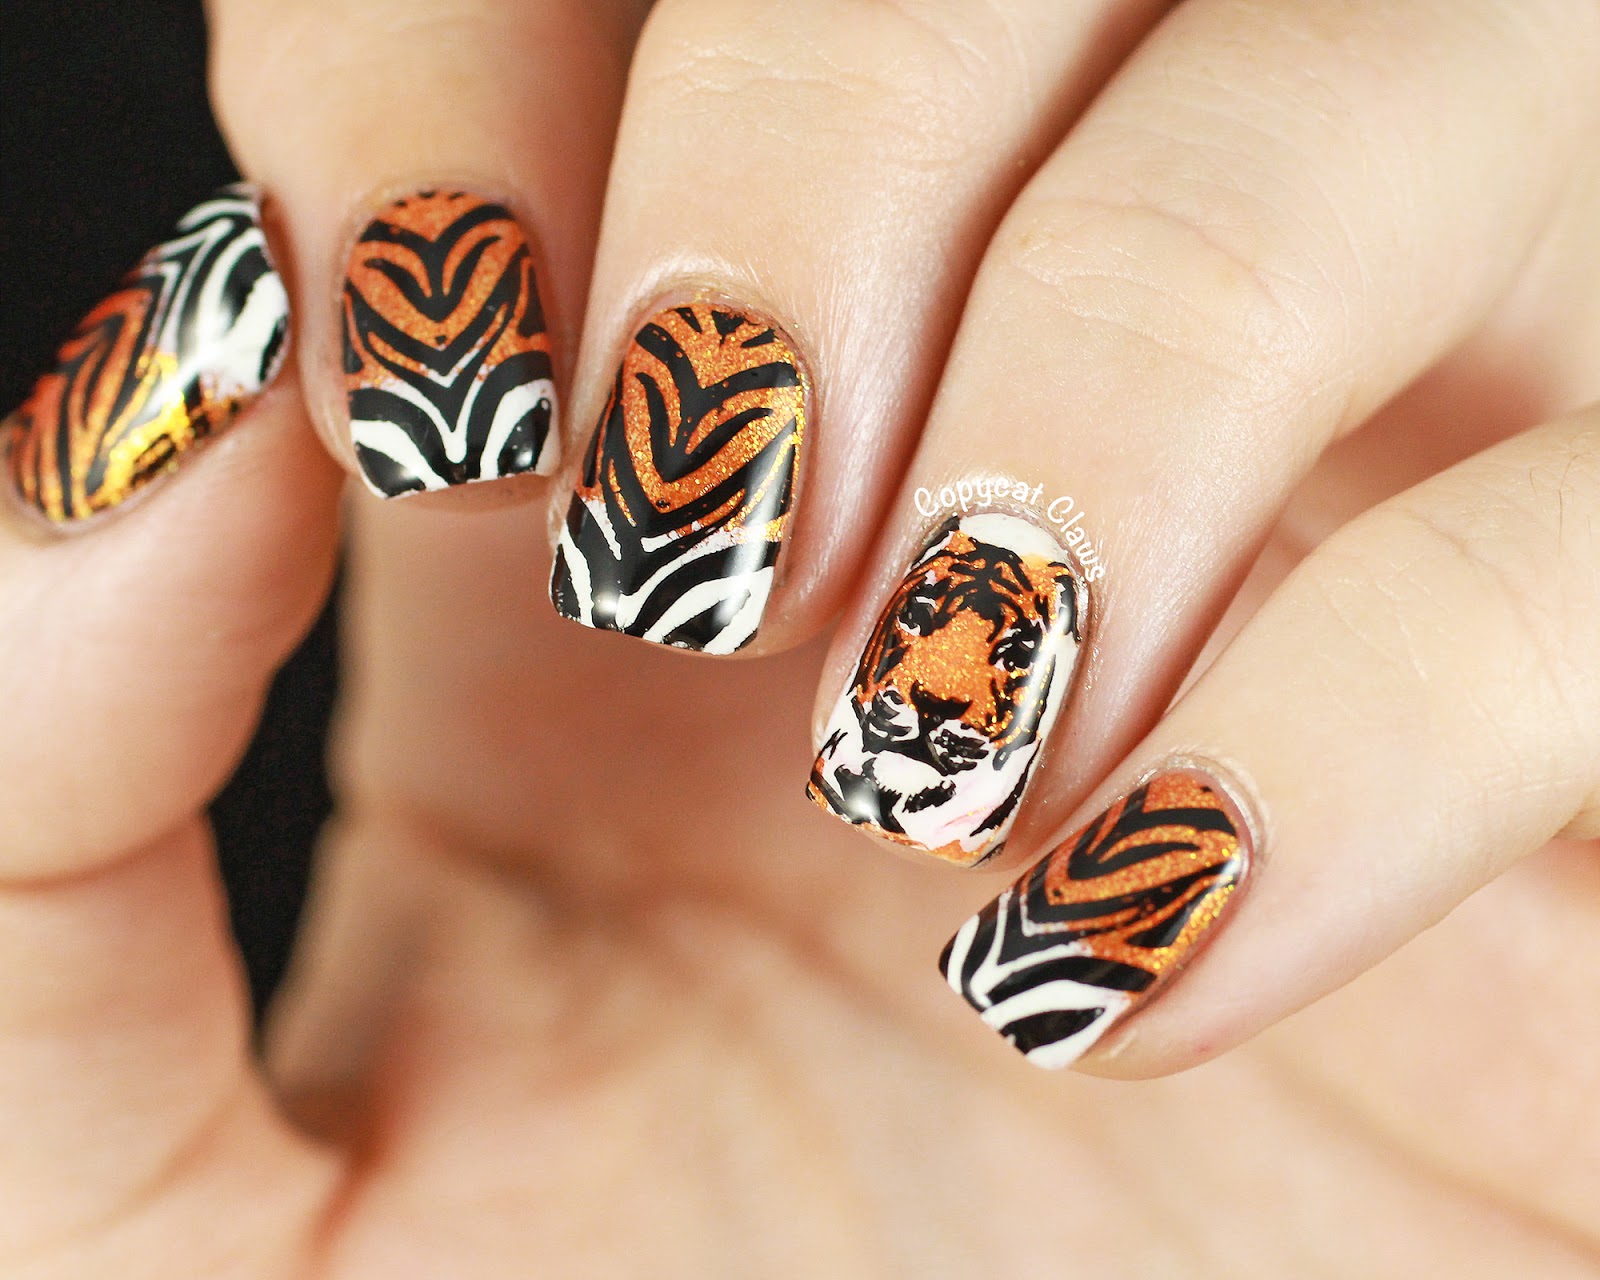 8. "Tiger Face Nail Art Tutorial for Beginners" - wide 6